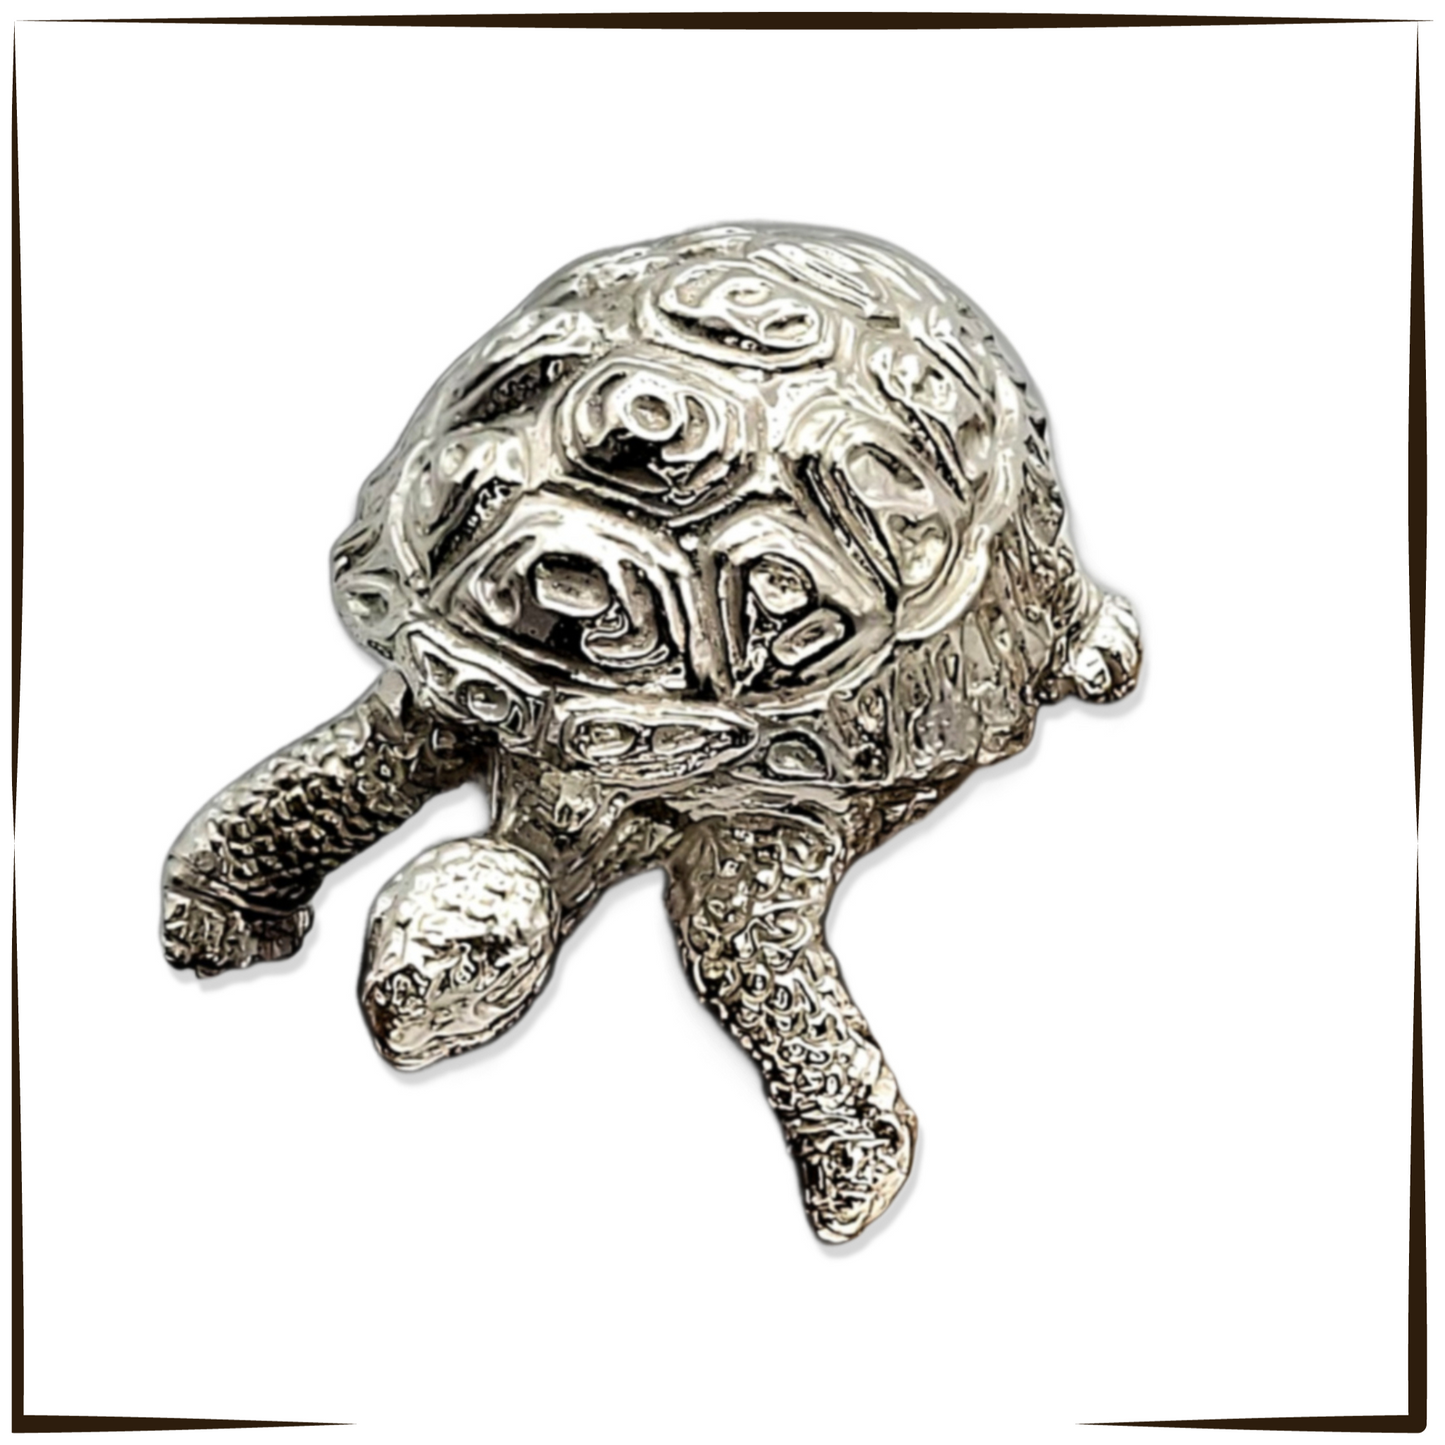 Pewter - The Wonderous Leopard Tortoise - Bolt (One of the "Little Five")